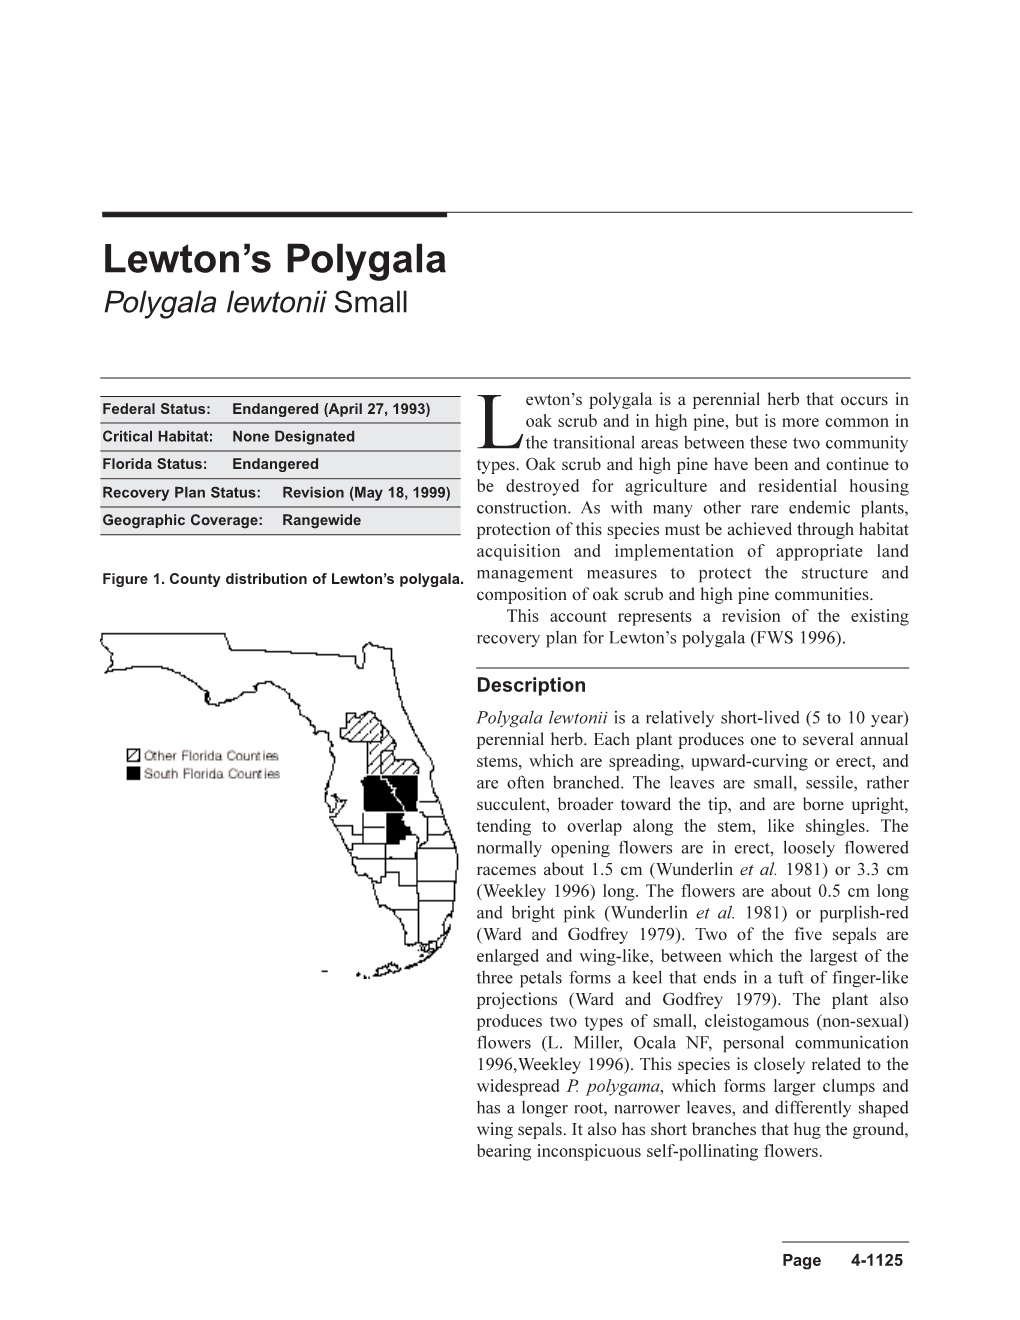 Lewton's Polygala Is a Perennial Herb That Occurs In